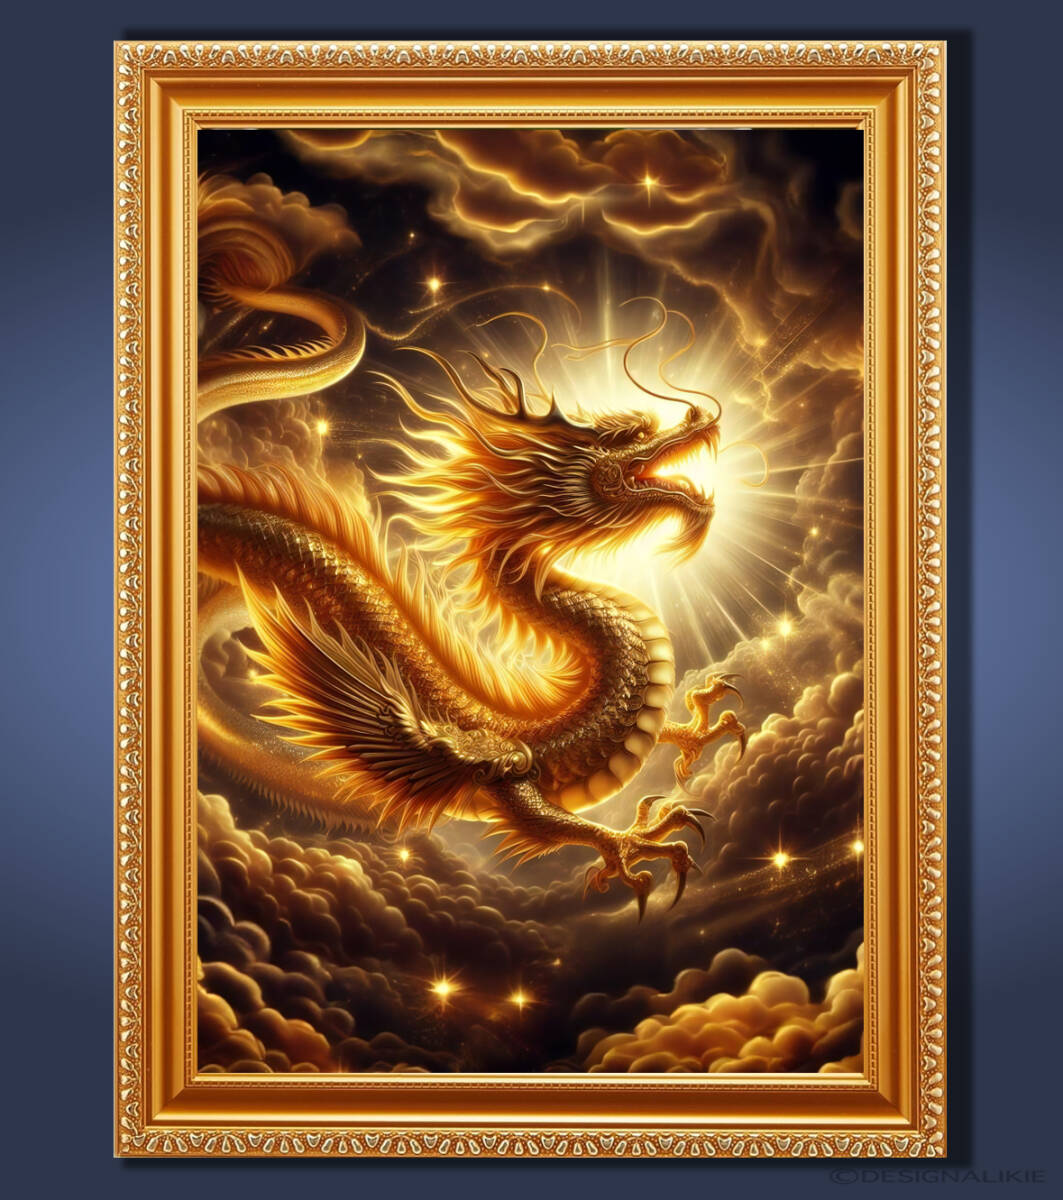 Golden Dragon that brings luck in money, wealth, and career Framed graphic and spiritual art, Artwork, Painting, others